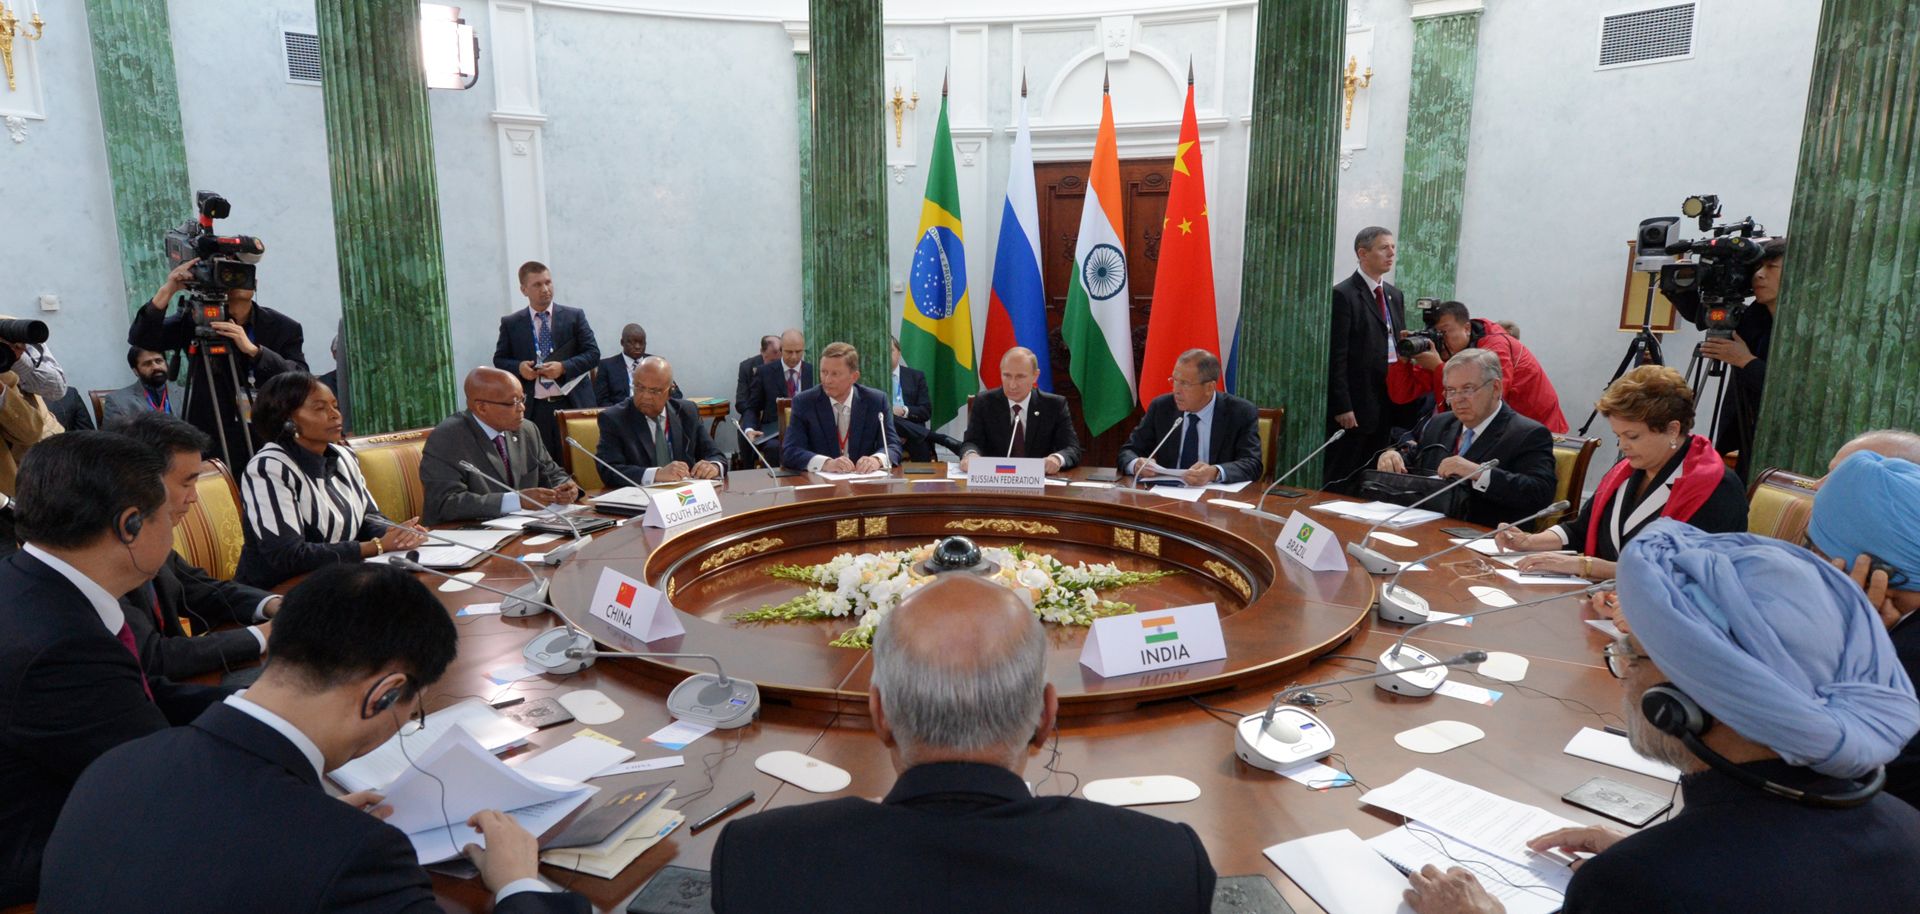 Leaders talk at the BRICS meeting during the G20 summit in 2013 in St. Petersburg, Russia. 